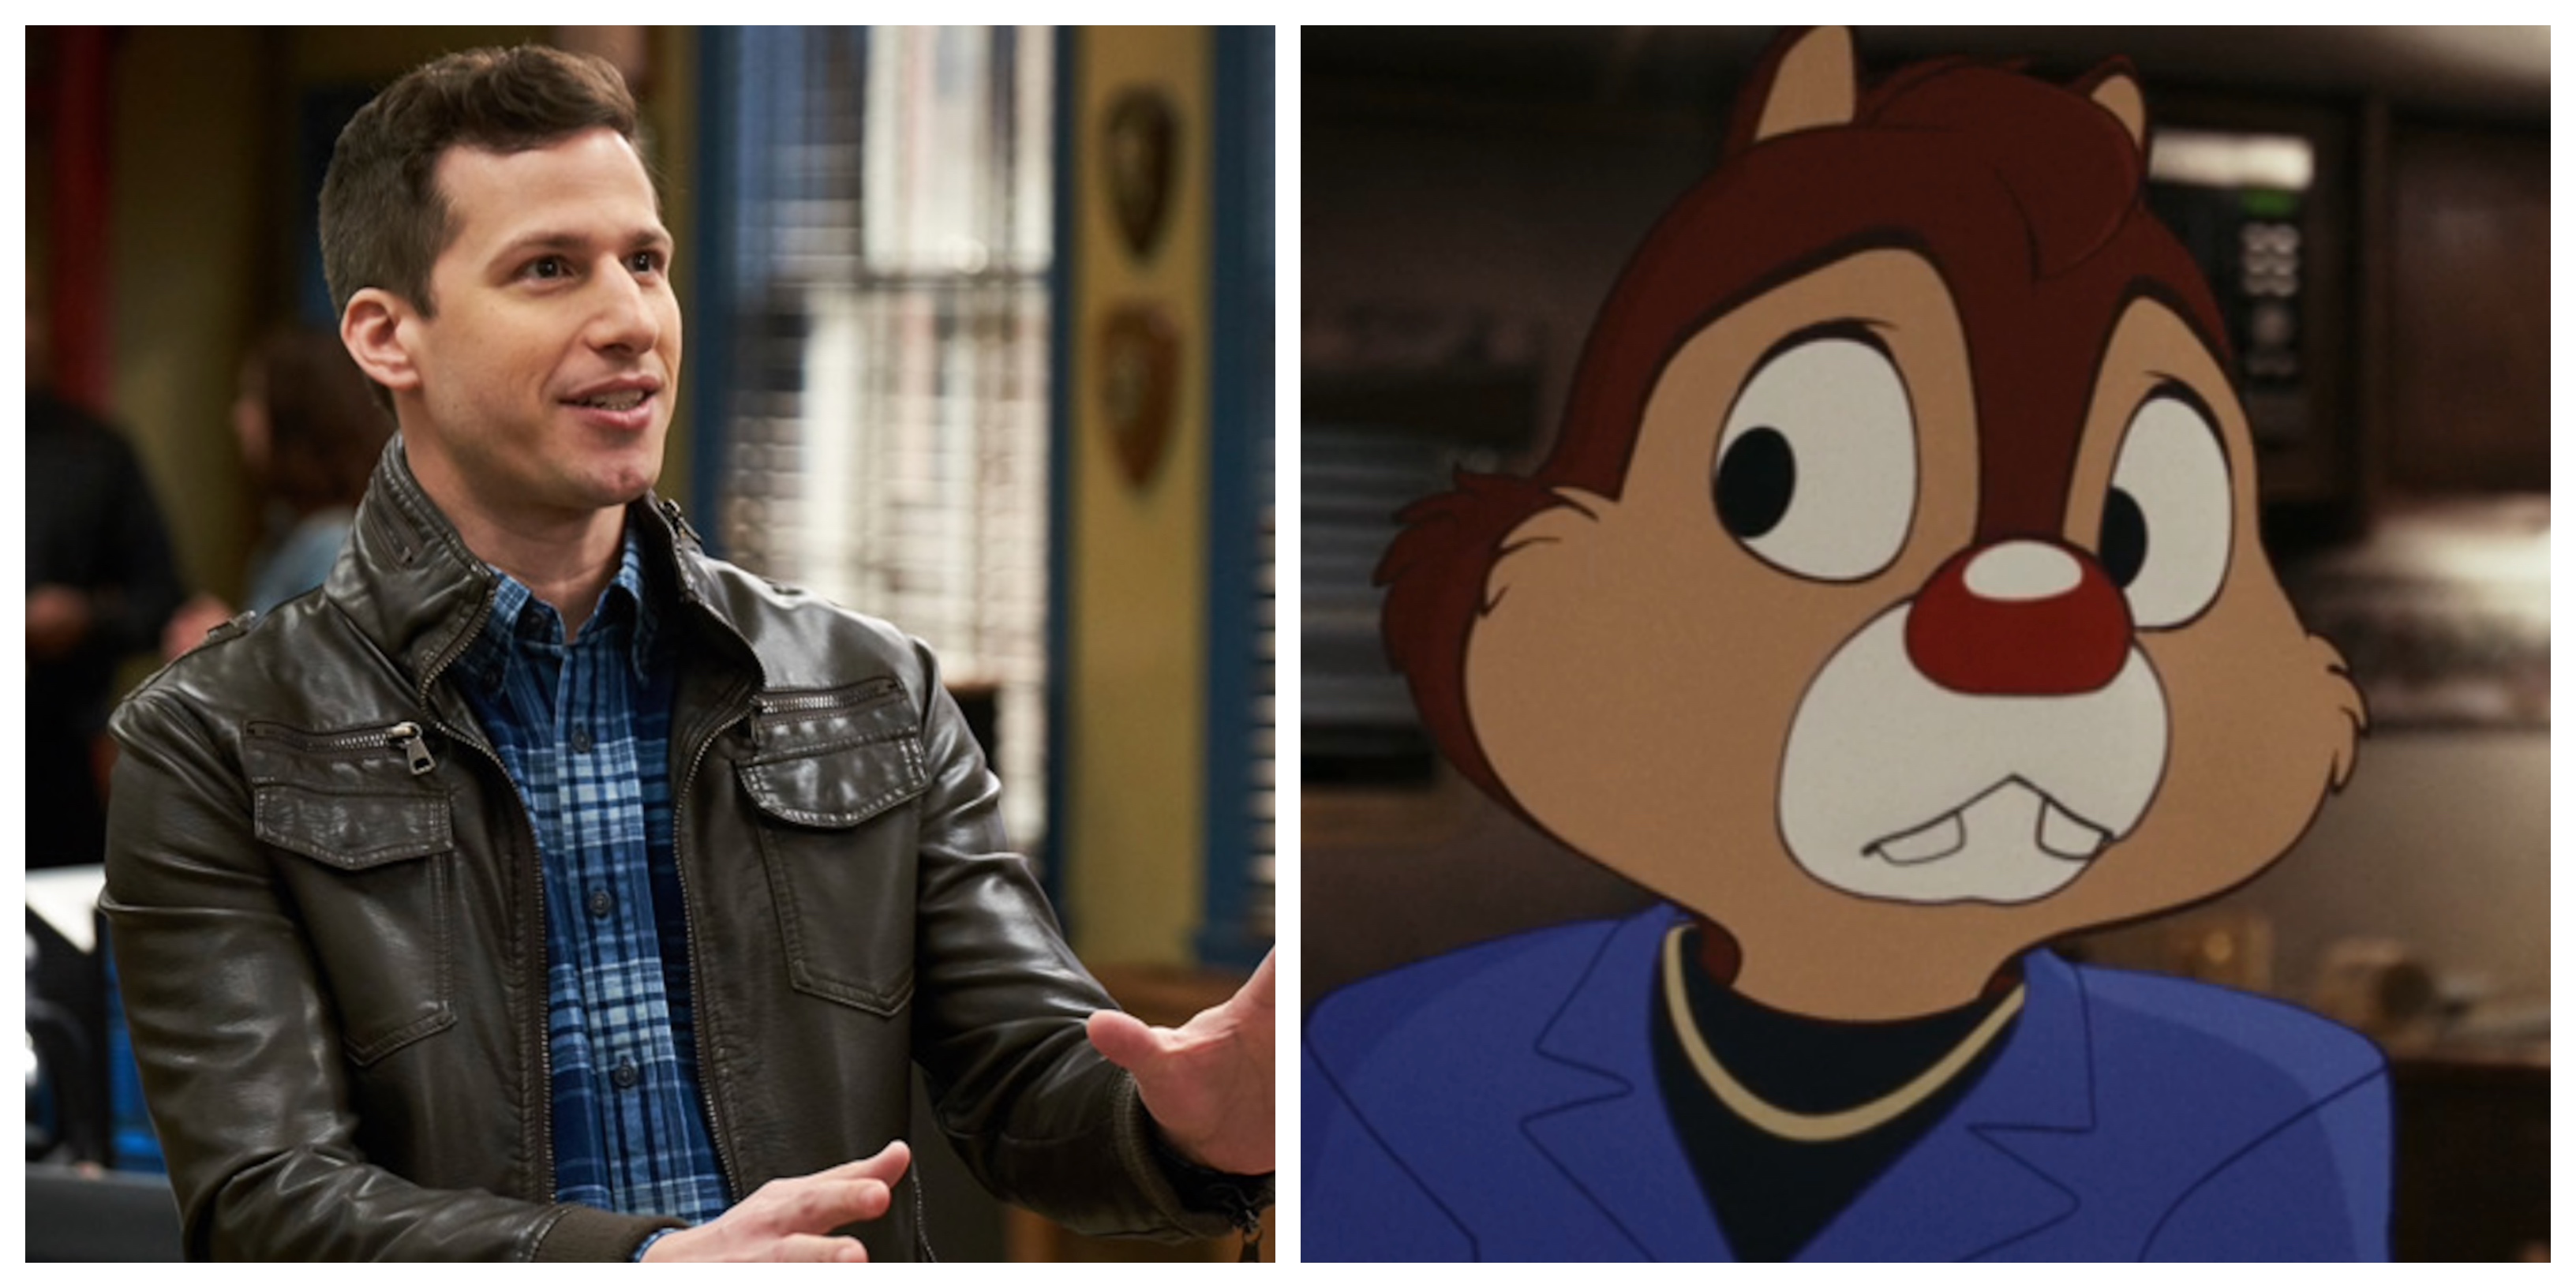 Chip 'n Dale: Rescue Rangers Voice Cast - Andy Samberg as Dale